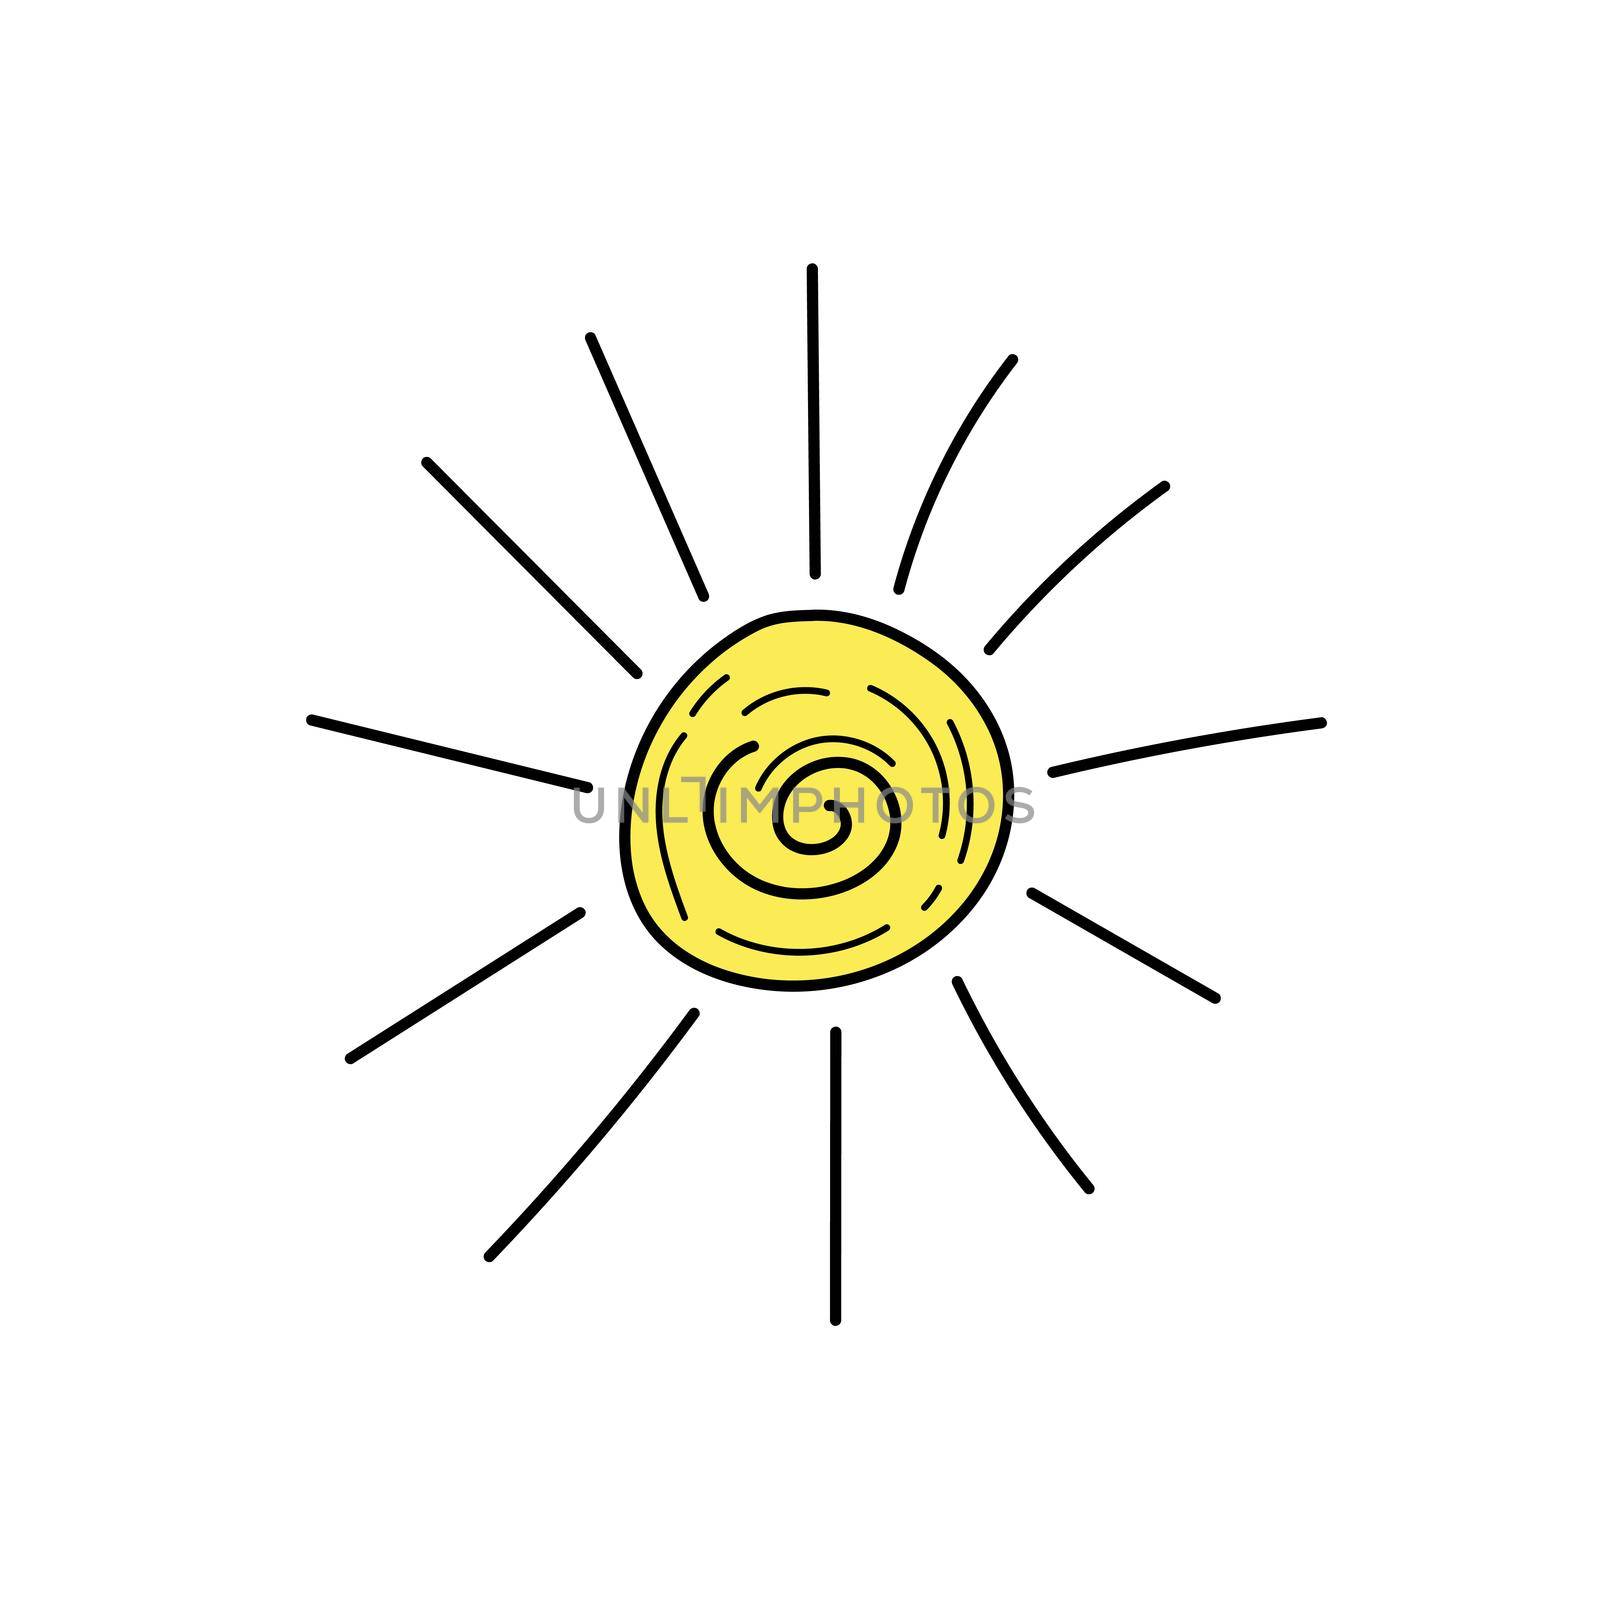 Sketch of sun. Vector illustration. Sun doodle icon. Simple hand drawn icon on white